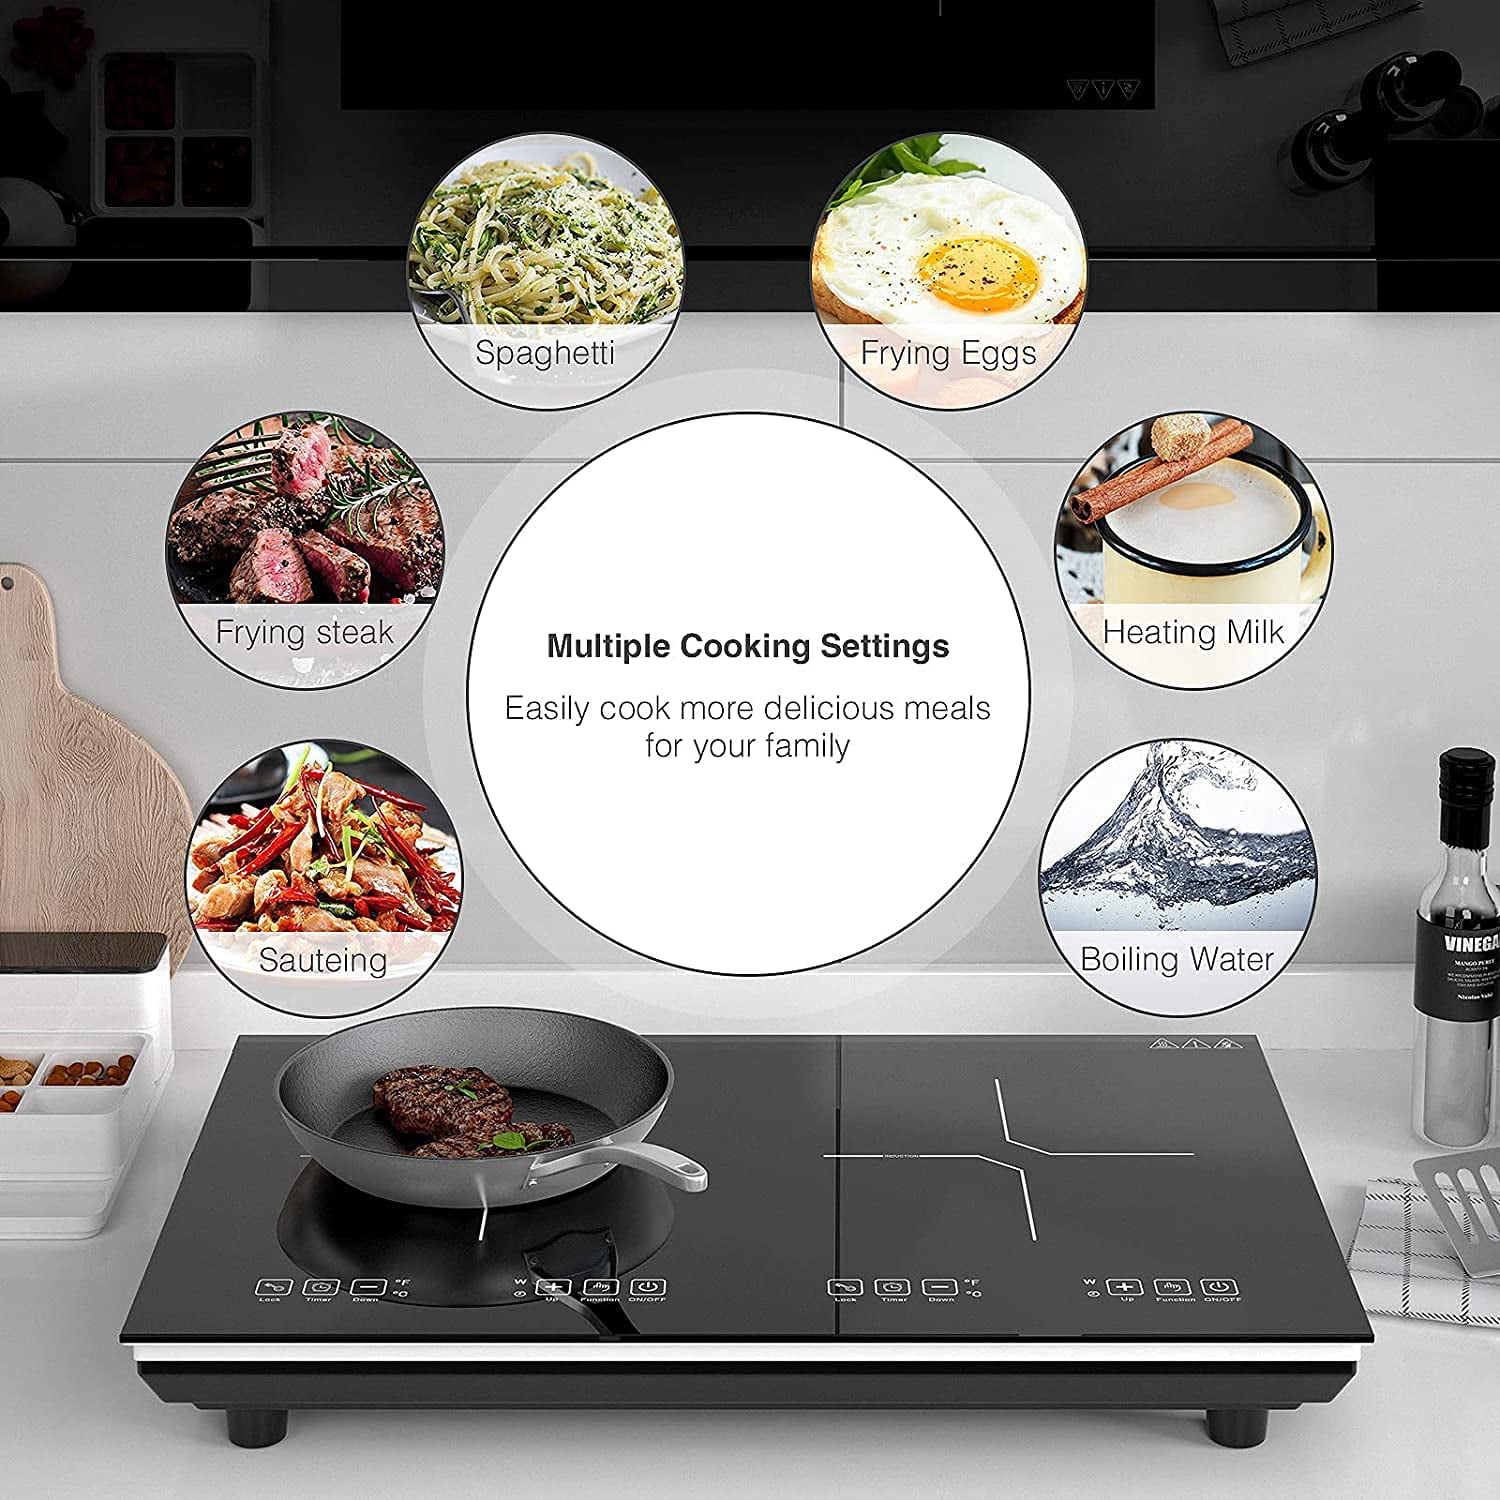 DUXTOP duxtop-E200A Duxtop Portable Induction Cooktop, High End Full Glass Induction  Burner with Sensor Touch, 1800W Countertop Burner with Stainles